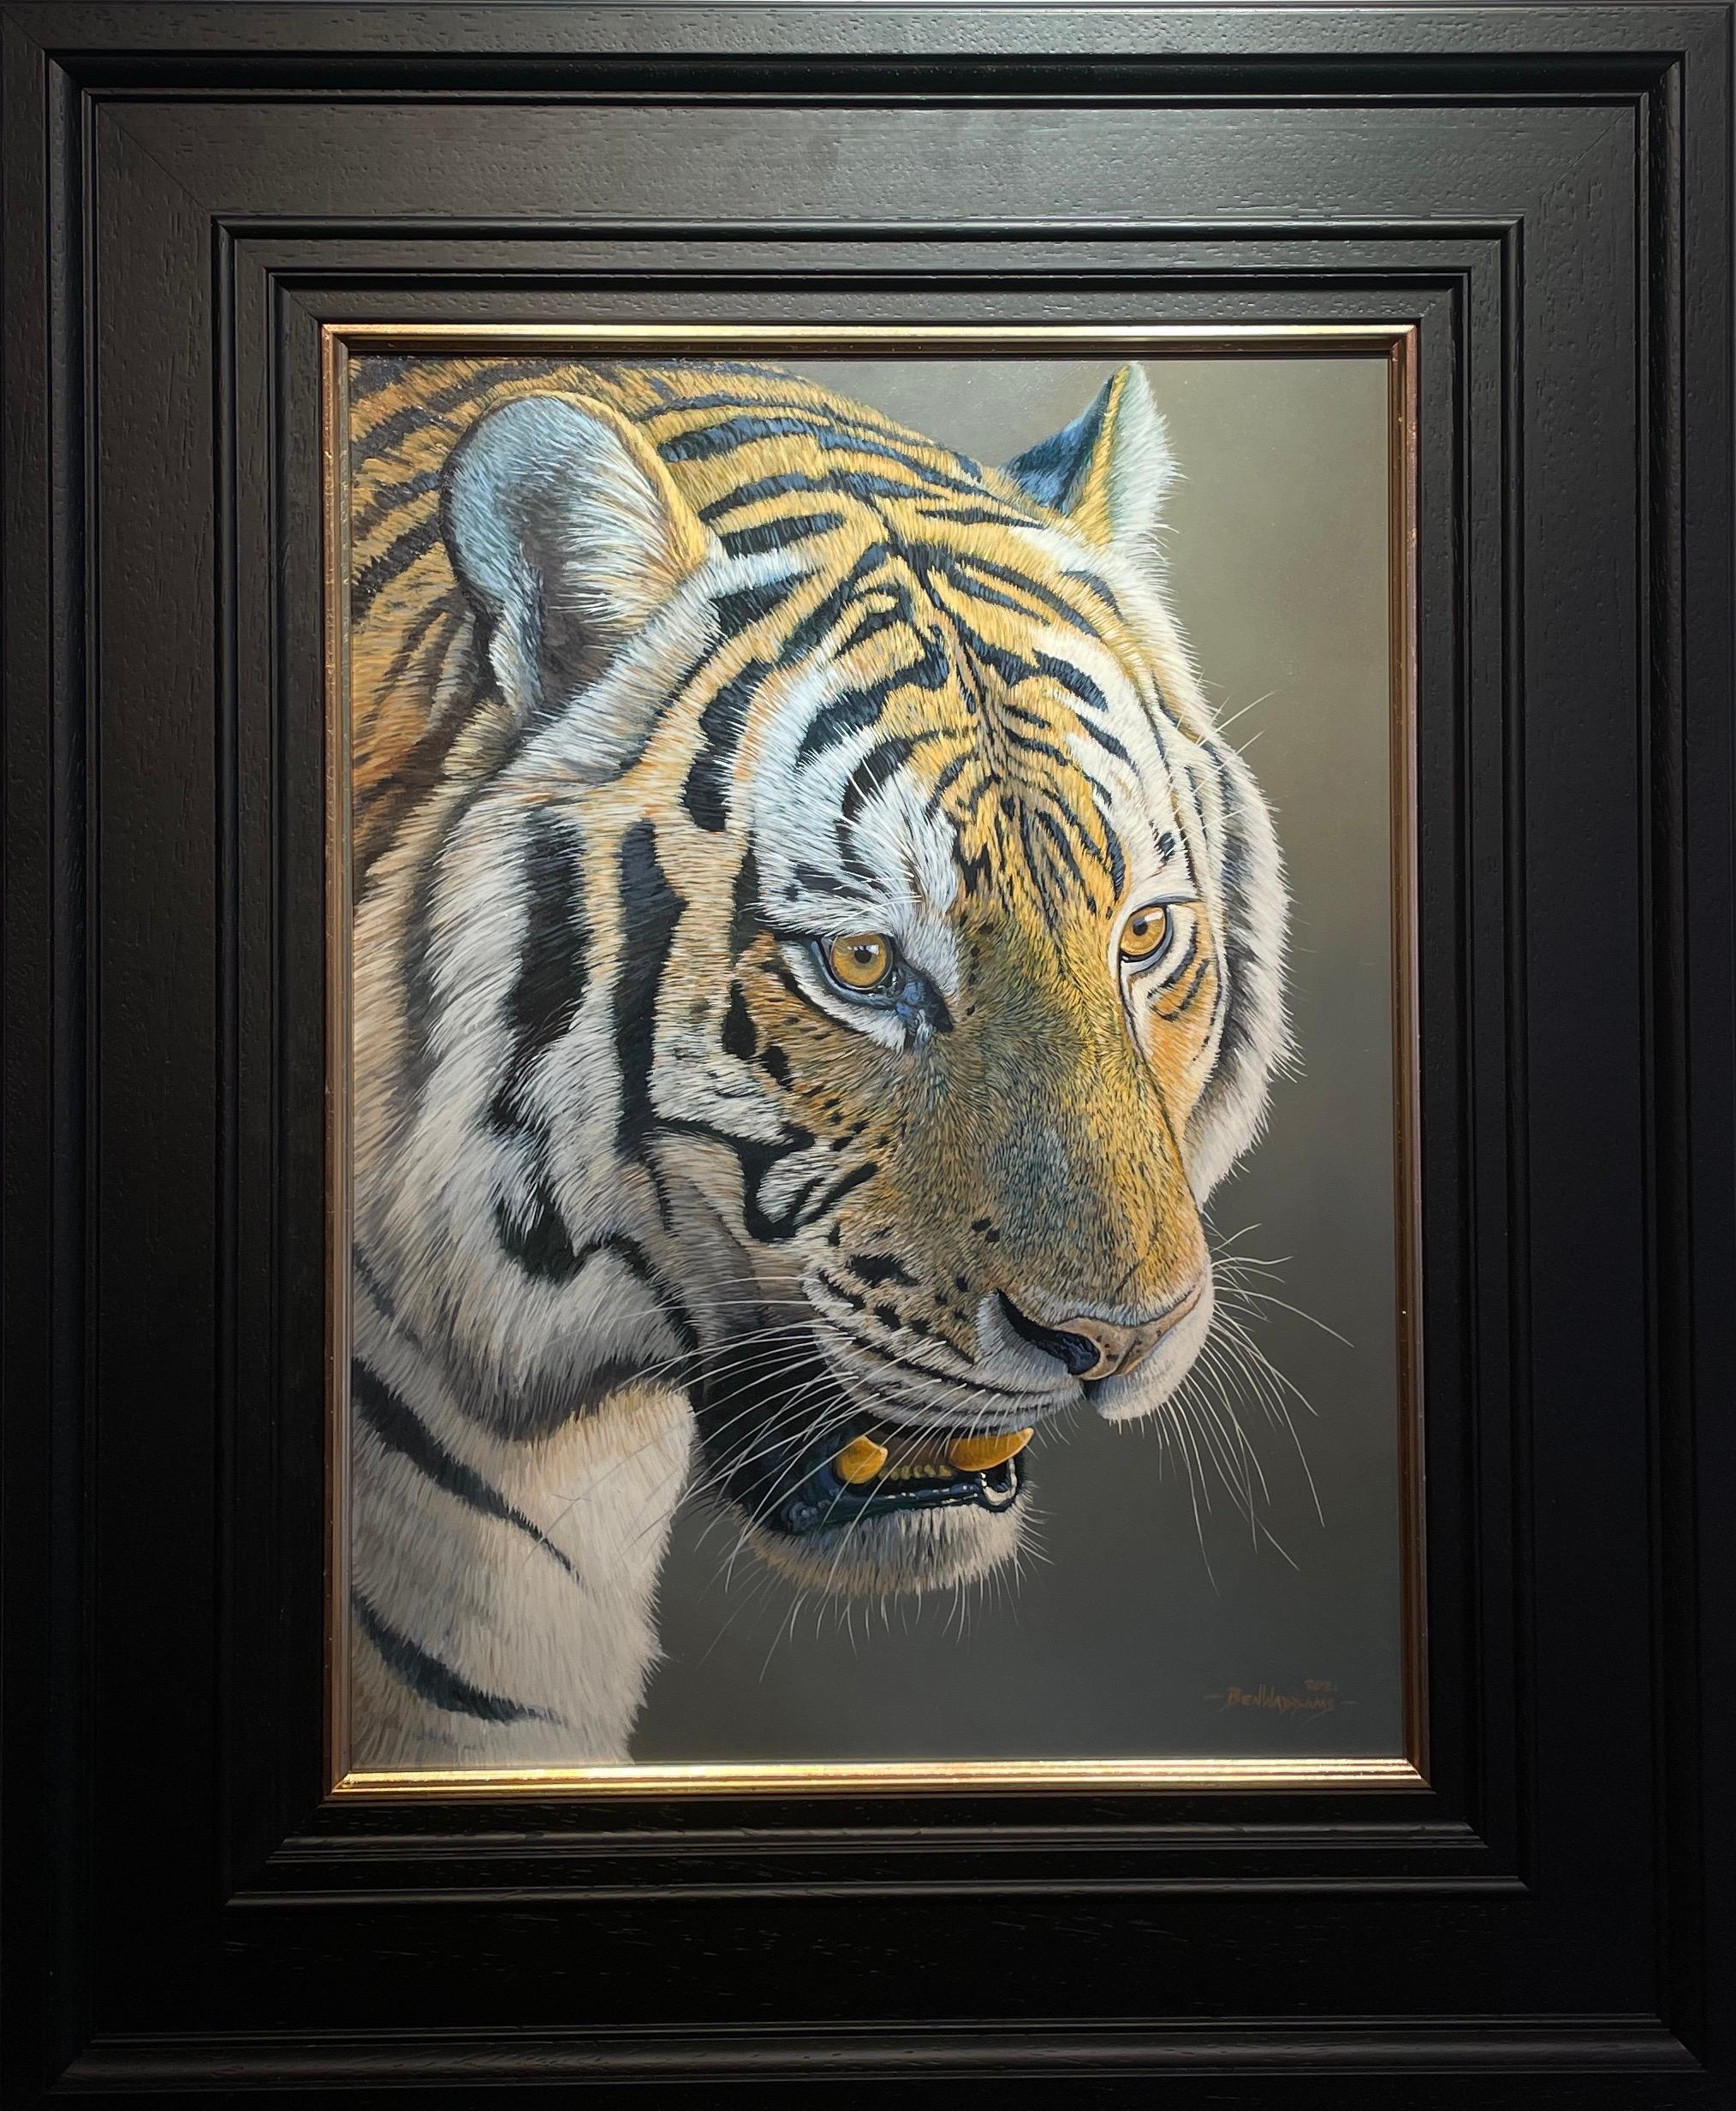 Ben Waddams Animal Painting - 'Focus' Photorealist painting of a Tiger, ready to pounce, orange, grey & black